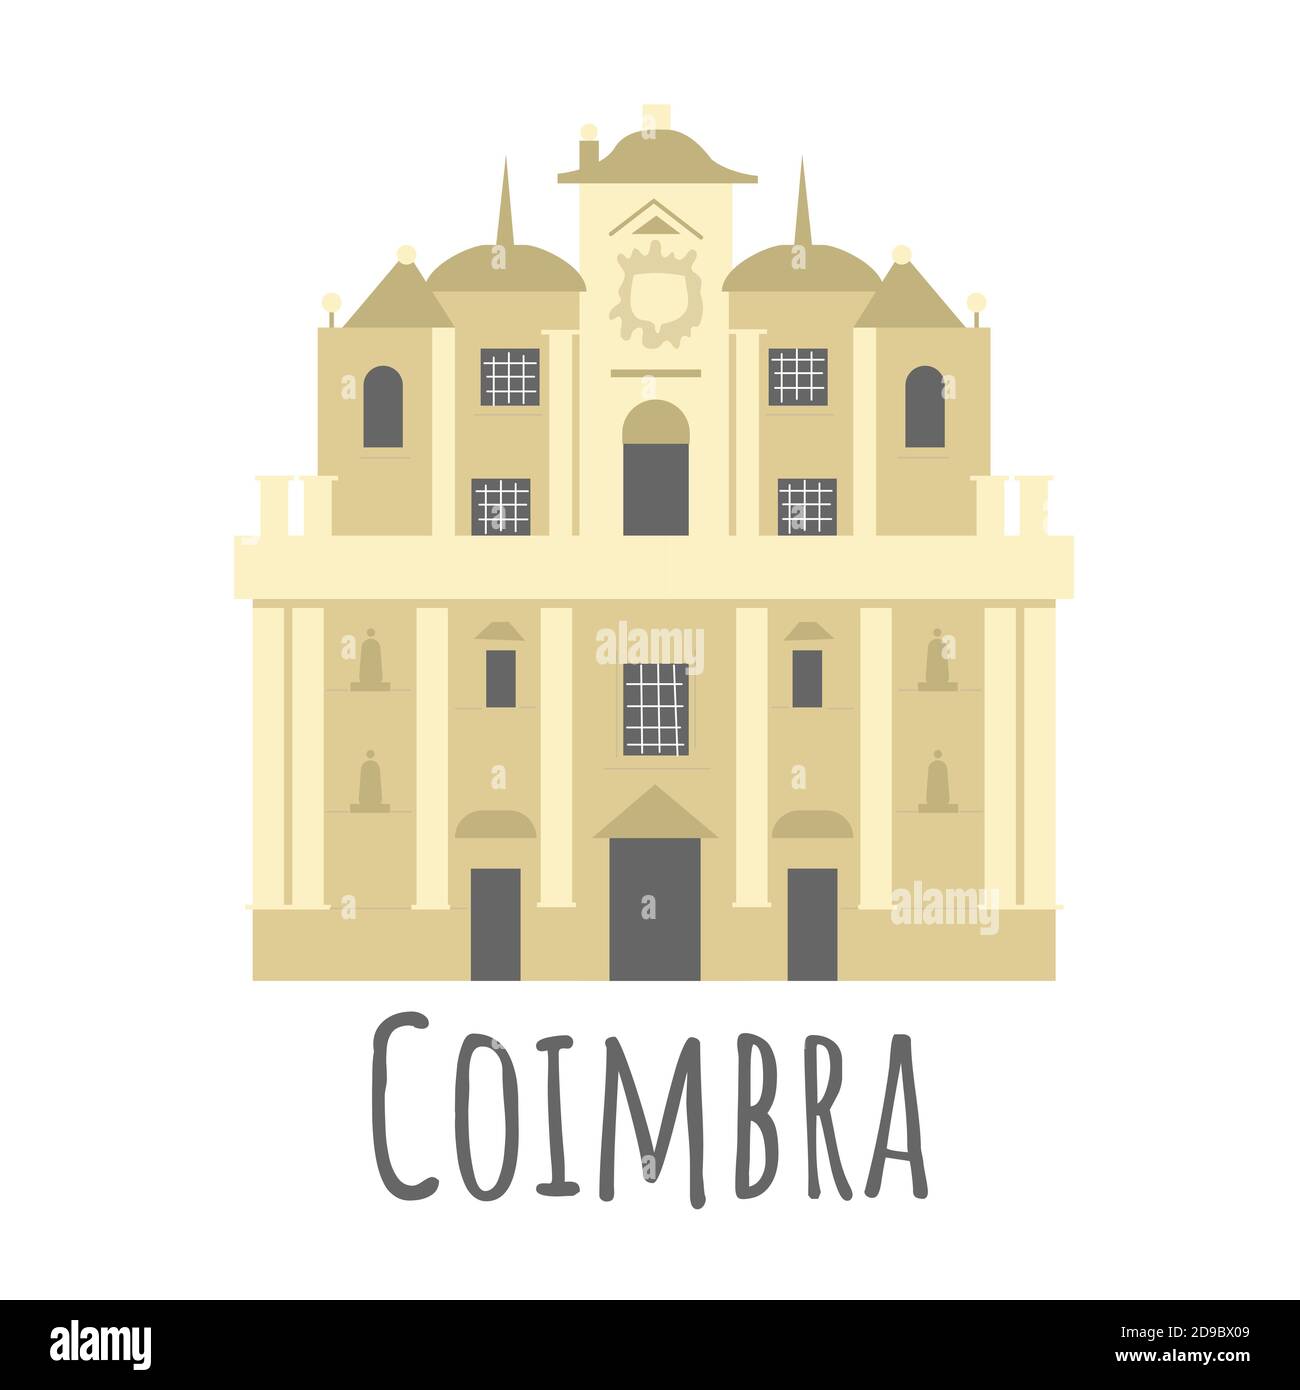 Flat style monastery of the holy cross, symbol of Coimbra. Landmark icon for travelers. Vector illustration isolated on white background Stock Vector